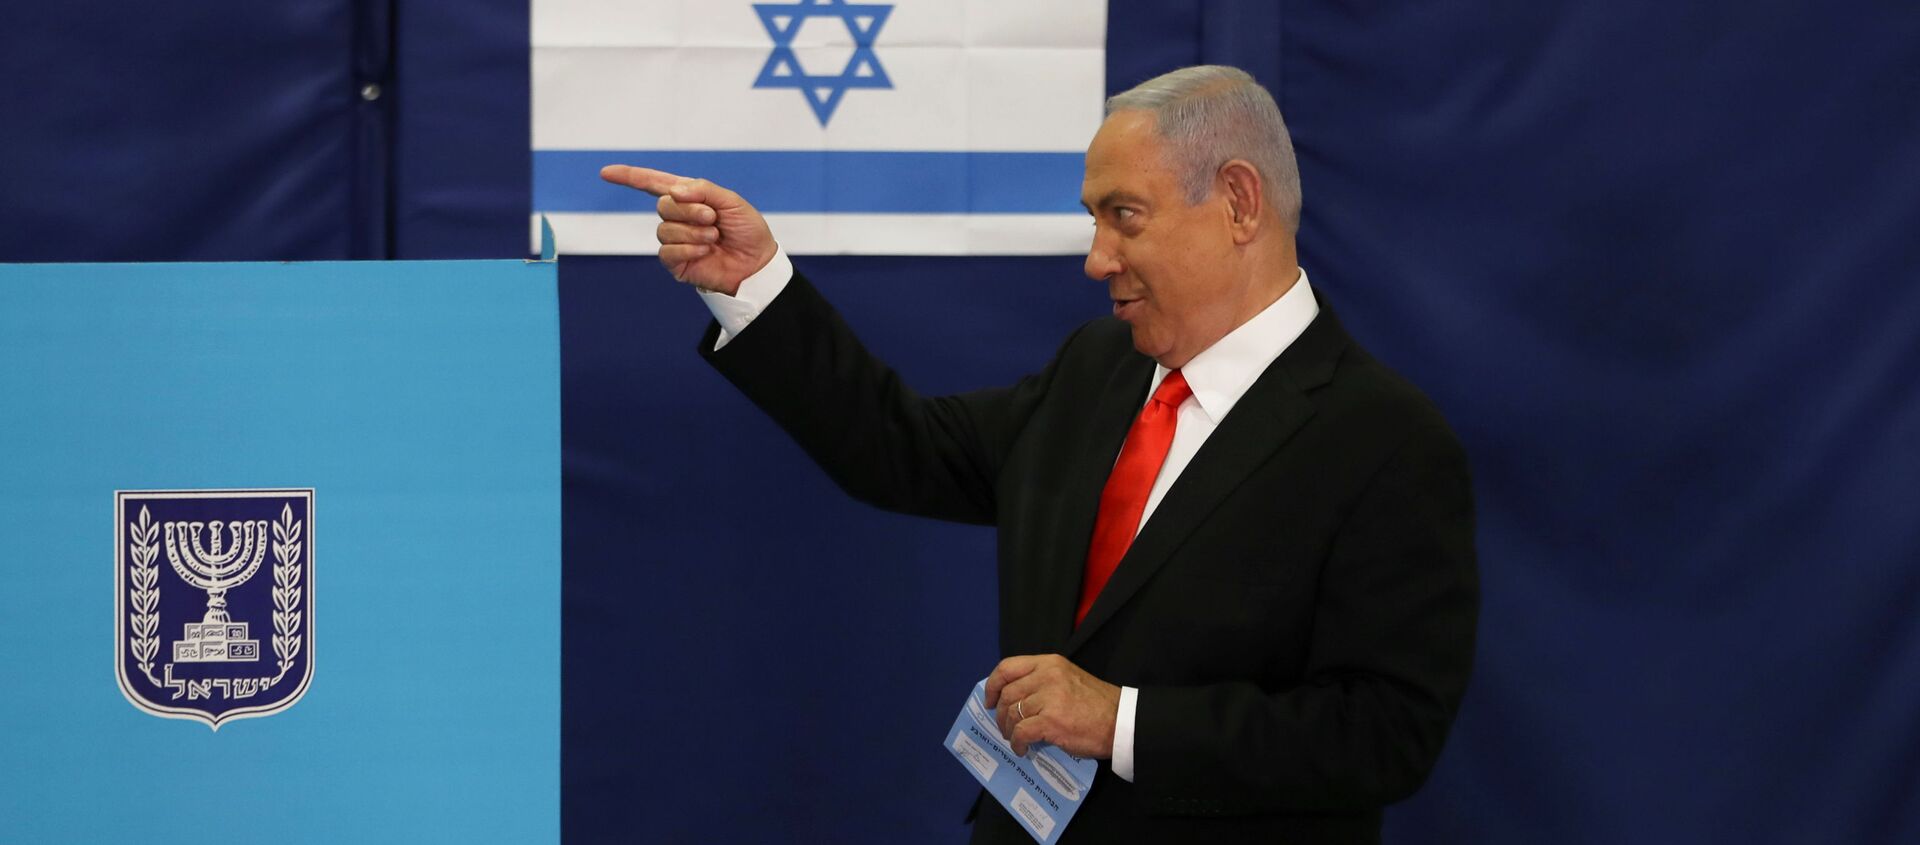 Israeli Prime Minister Benjamin Netanyahu gestures while standing near a voting booth as he prepares to cast his ballot in Israel's general election, at a polling station in Jerusalem March 23, 2021 - Sputnik International, 1920, 23.03.2021